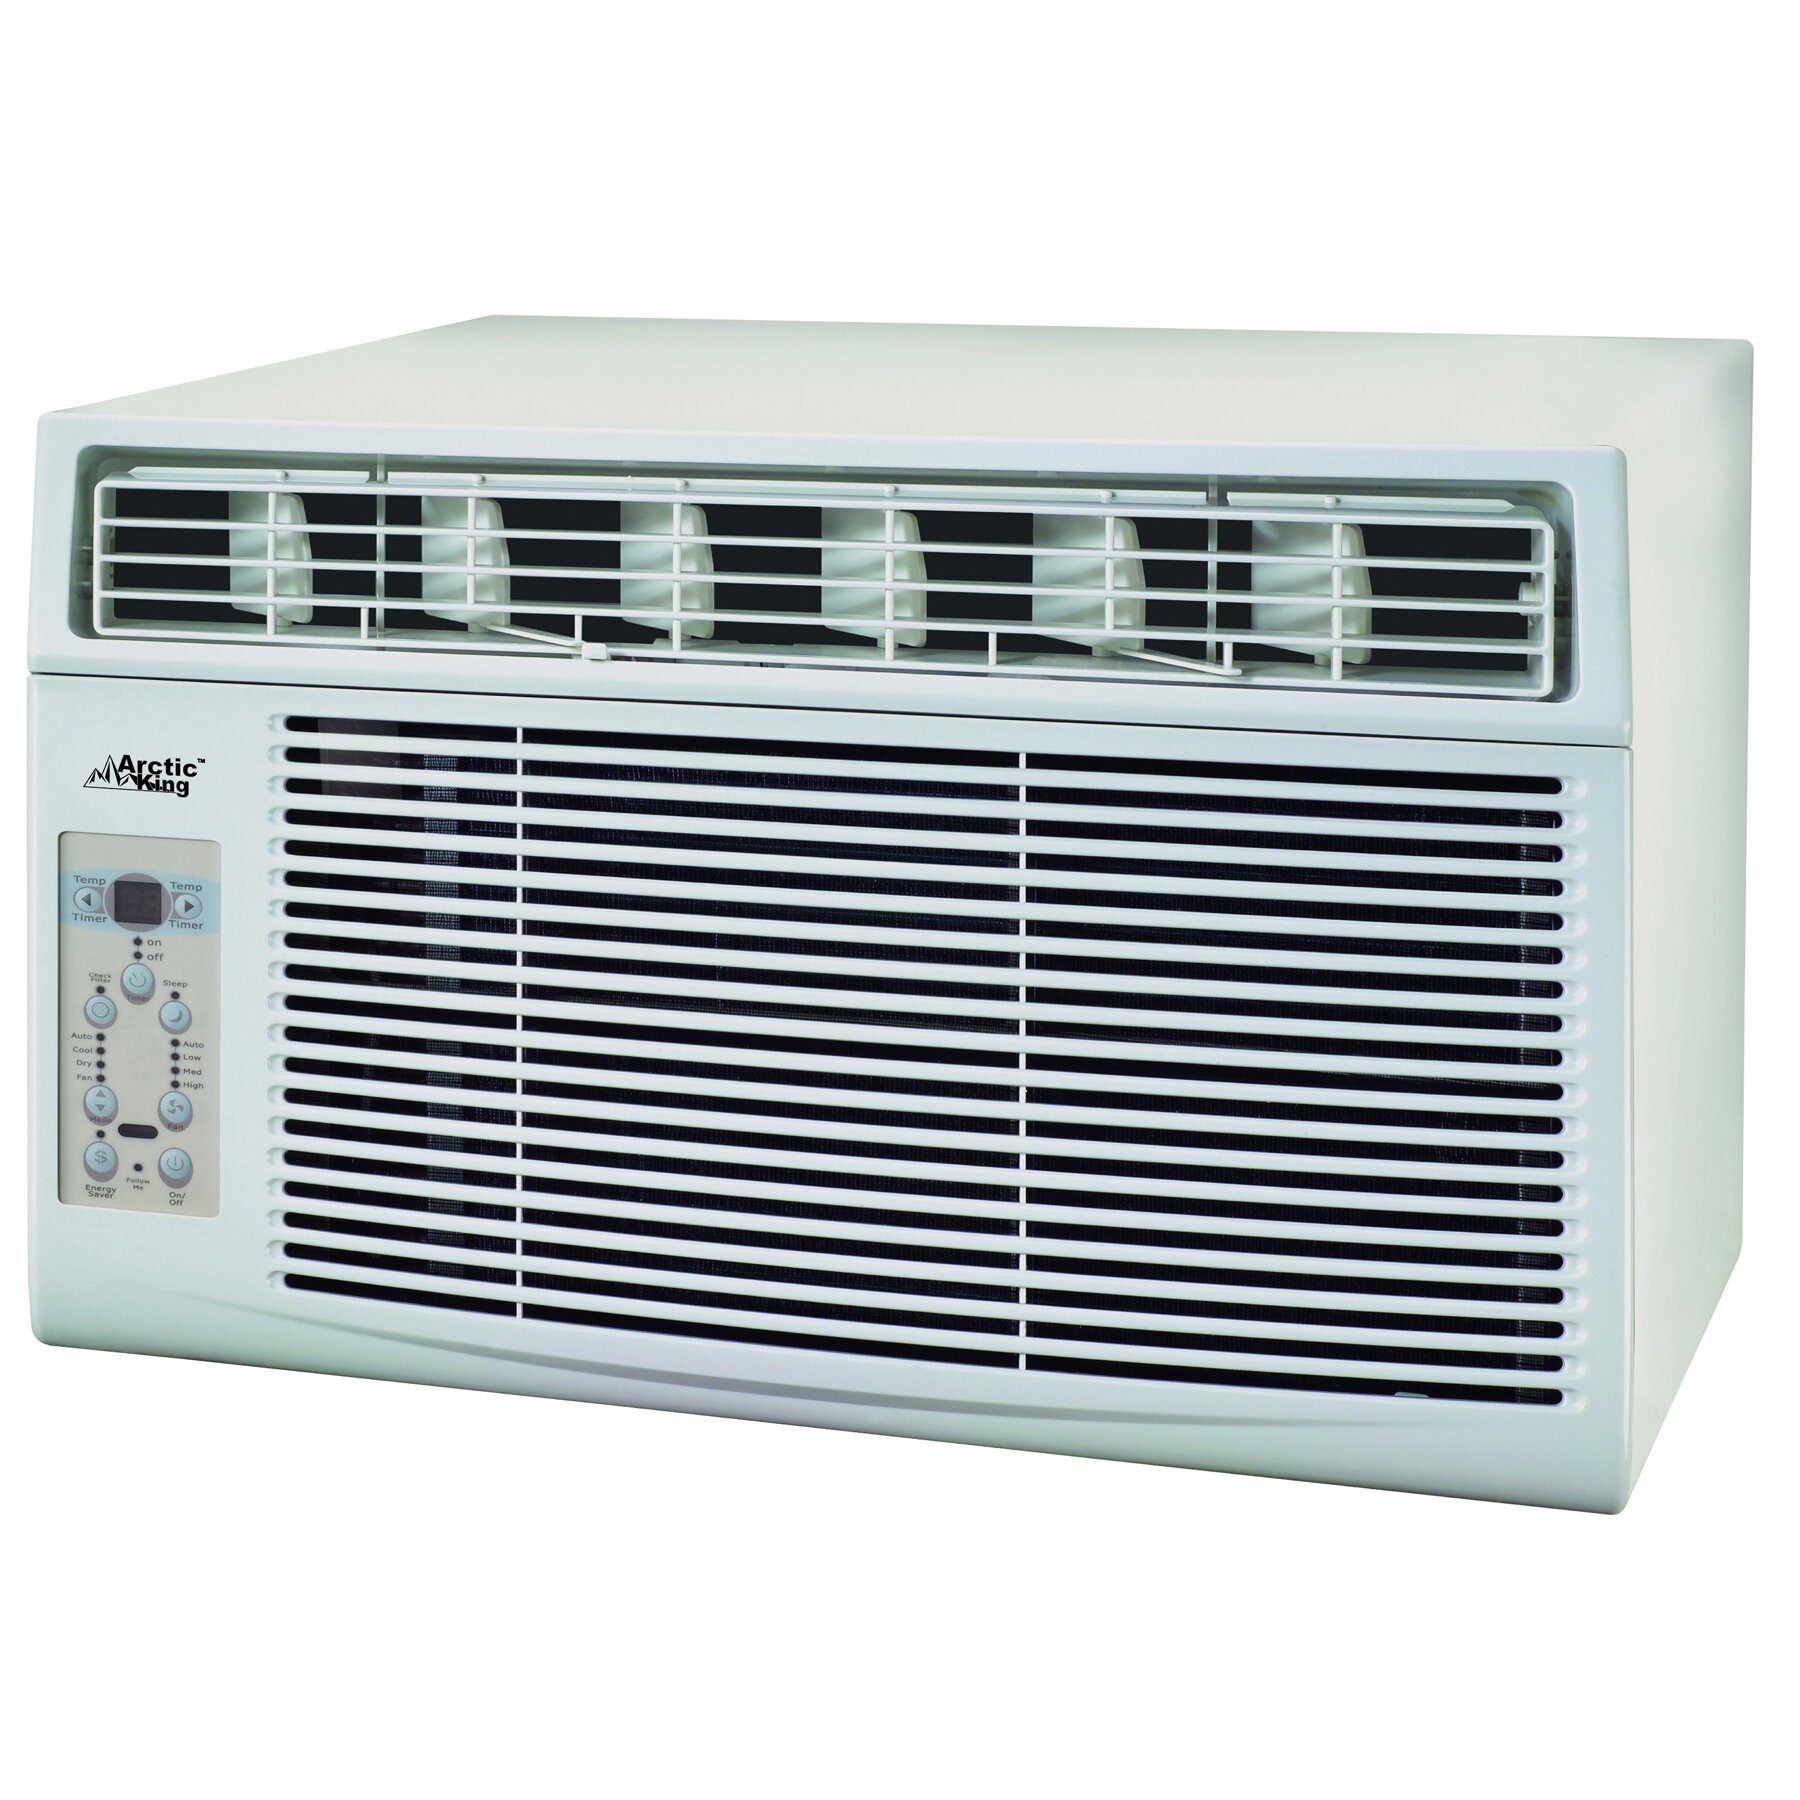  Arctic  King  10 000 BTU Window  Air  Conditioner  with Remote 